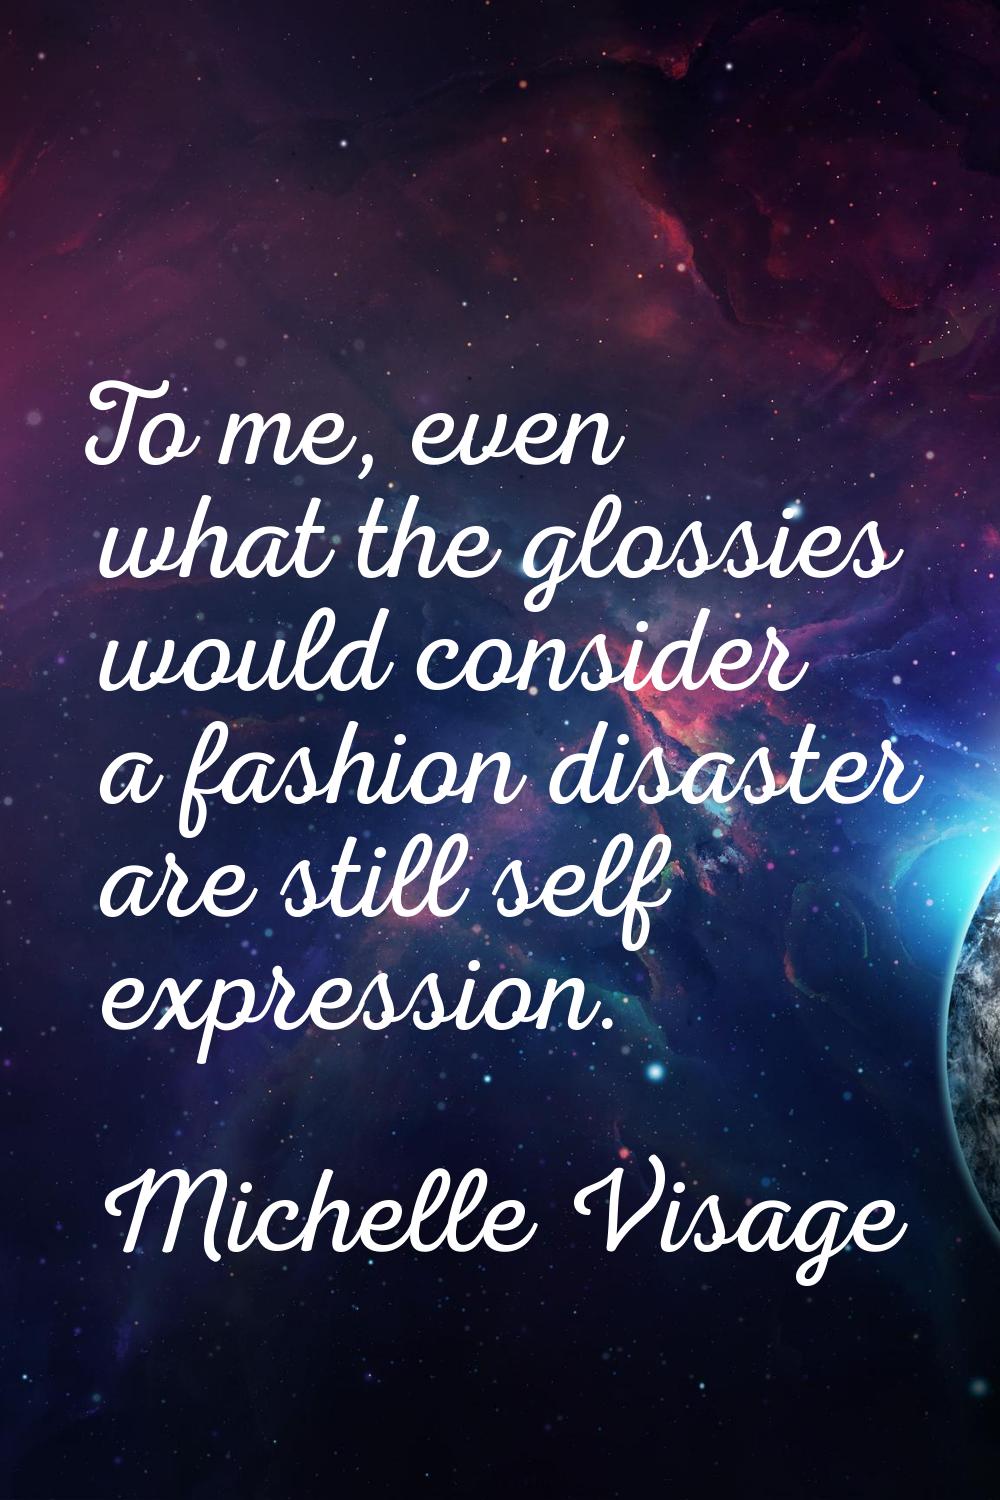 To me, even what the glossies would consider a fashion disaster are still self expression.